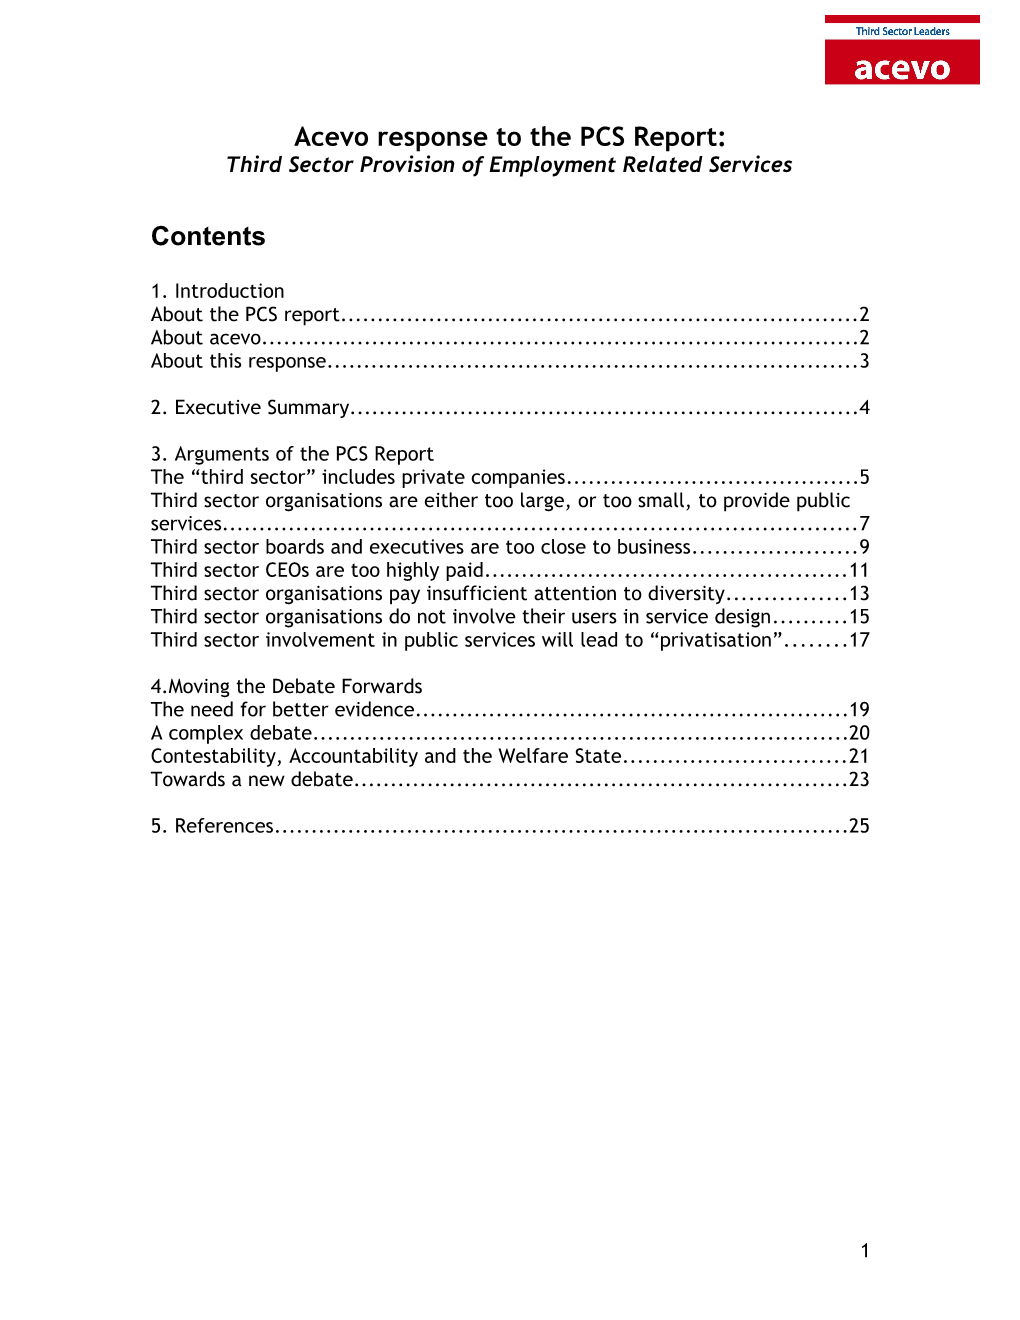 PCSU Report: Third Sector Provision of Employment Related Services